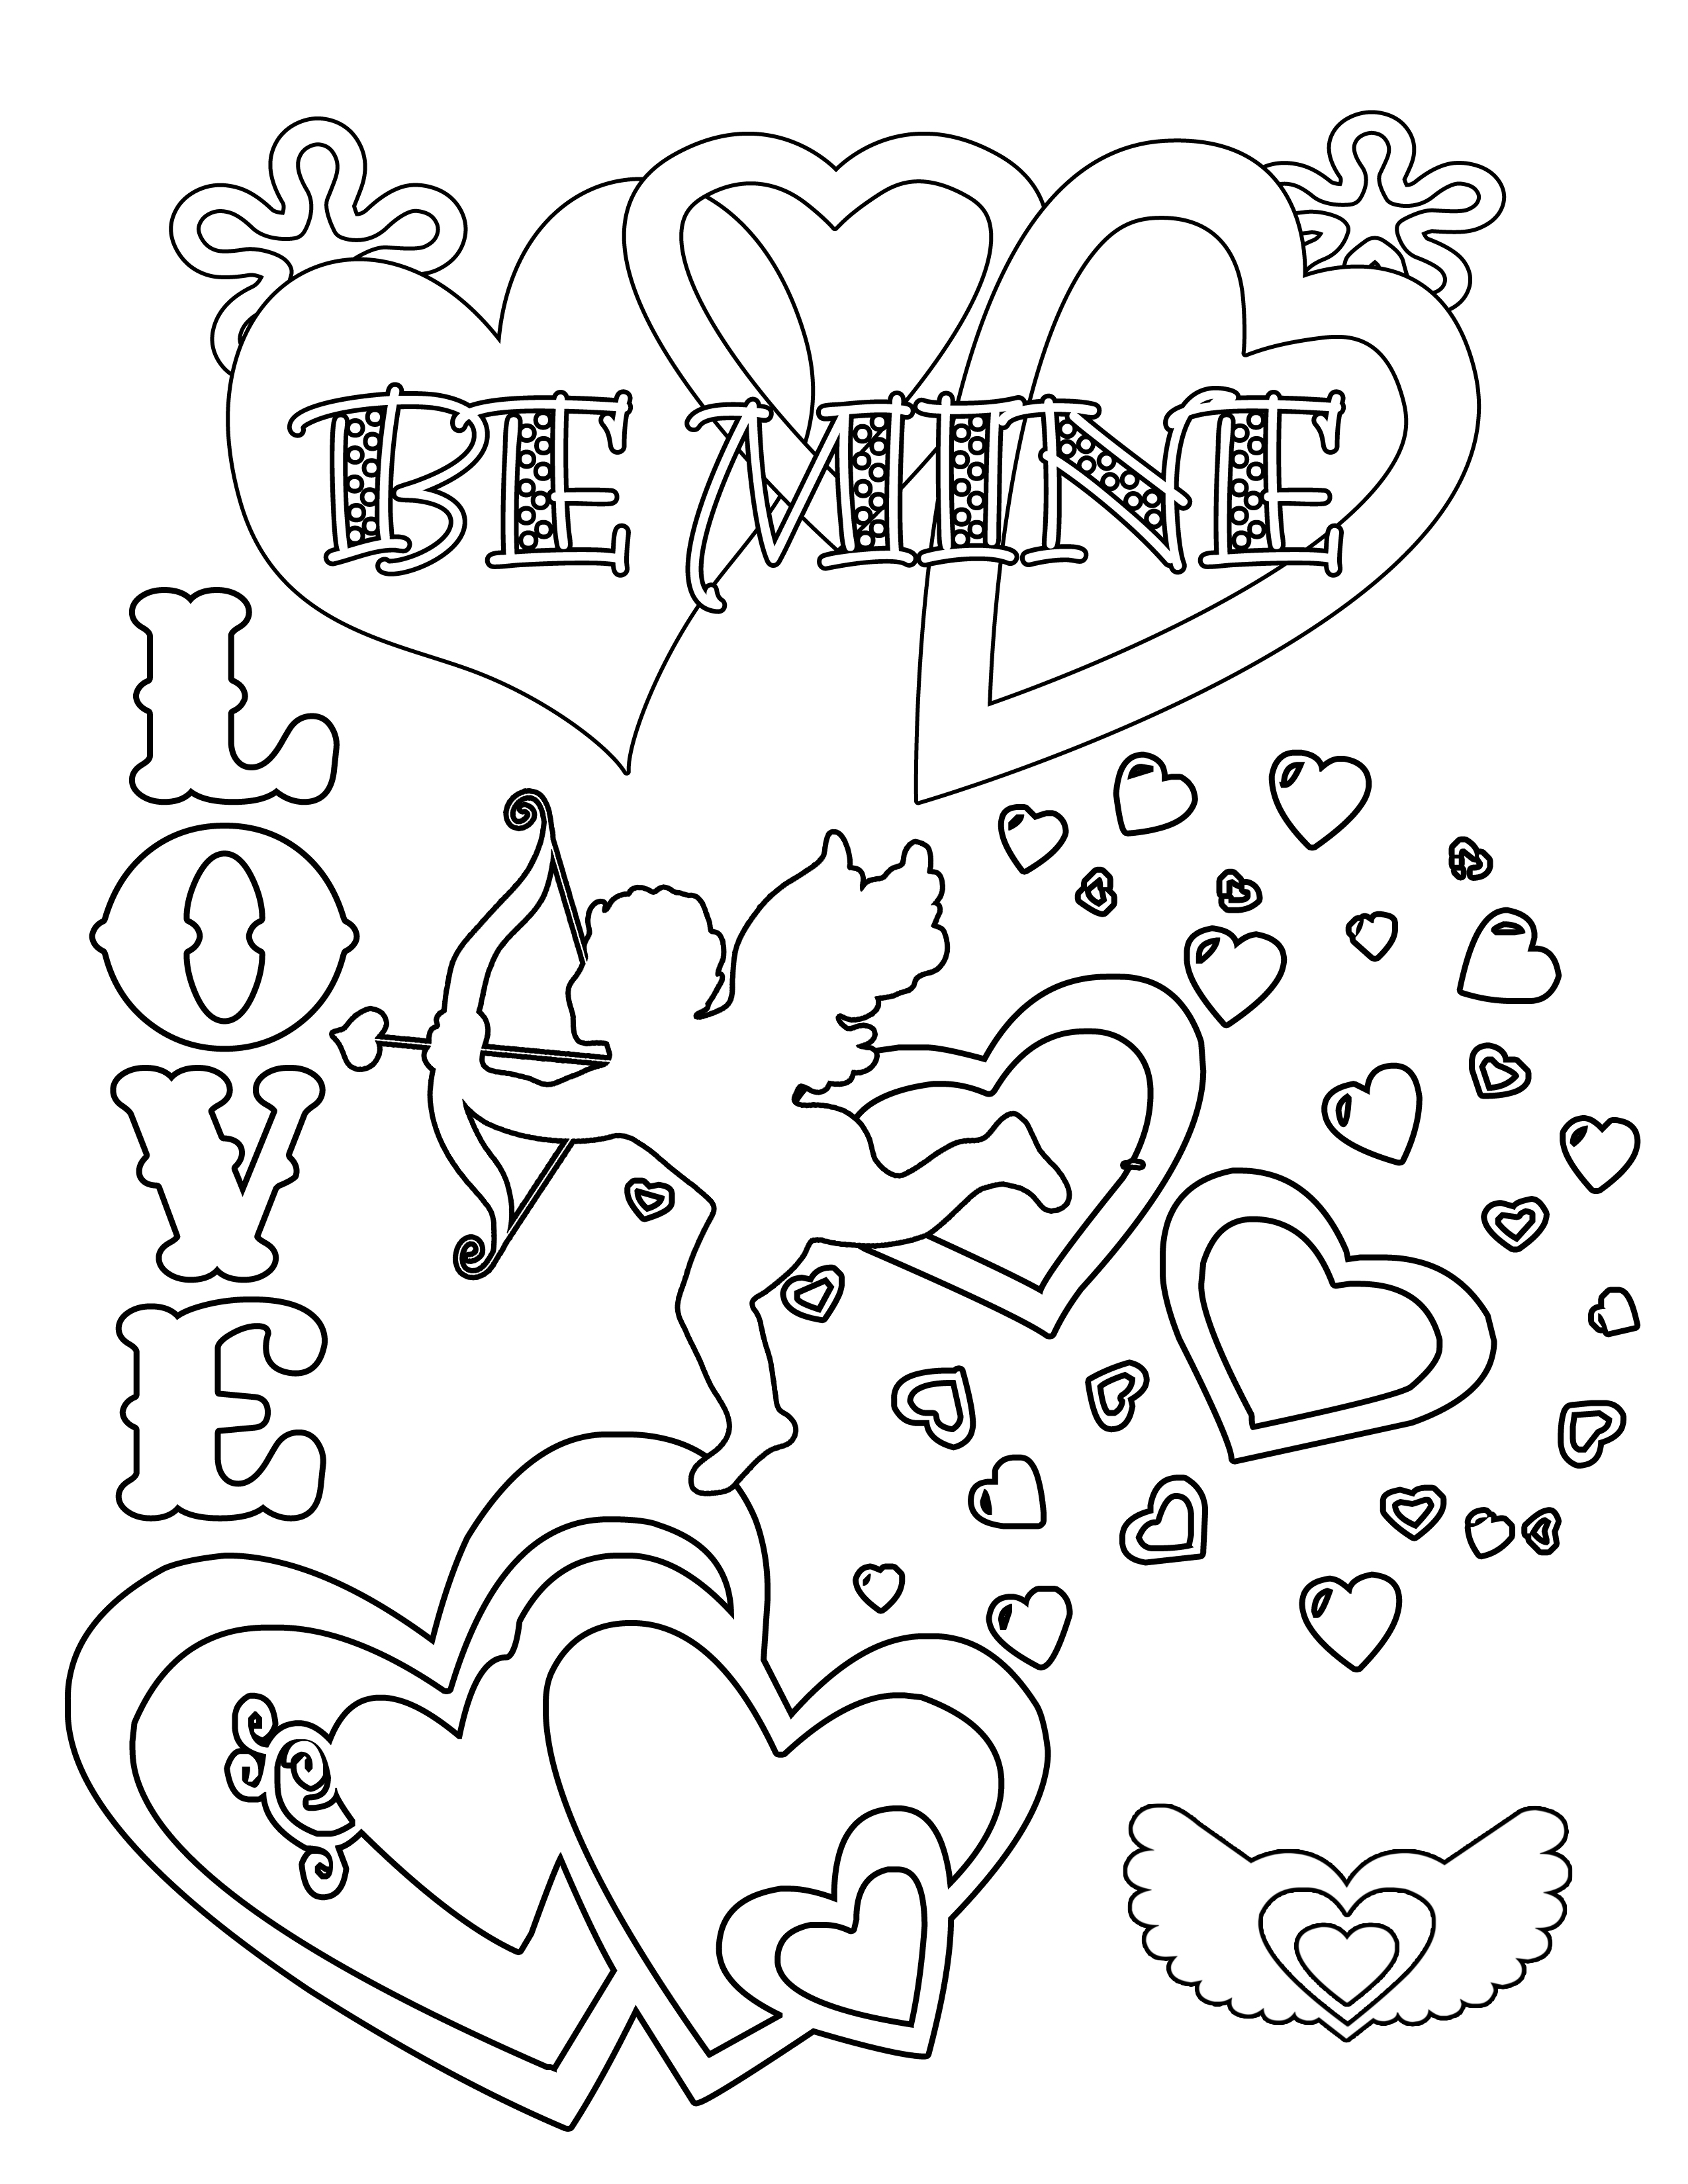 Party Simplicity Free Valentines Day Coloring Pages and Printables